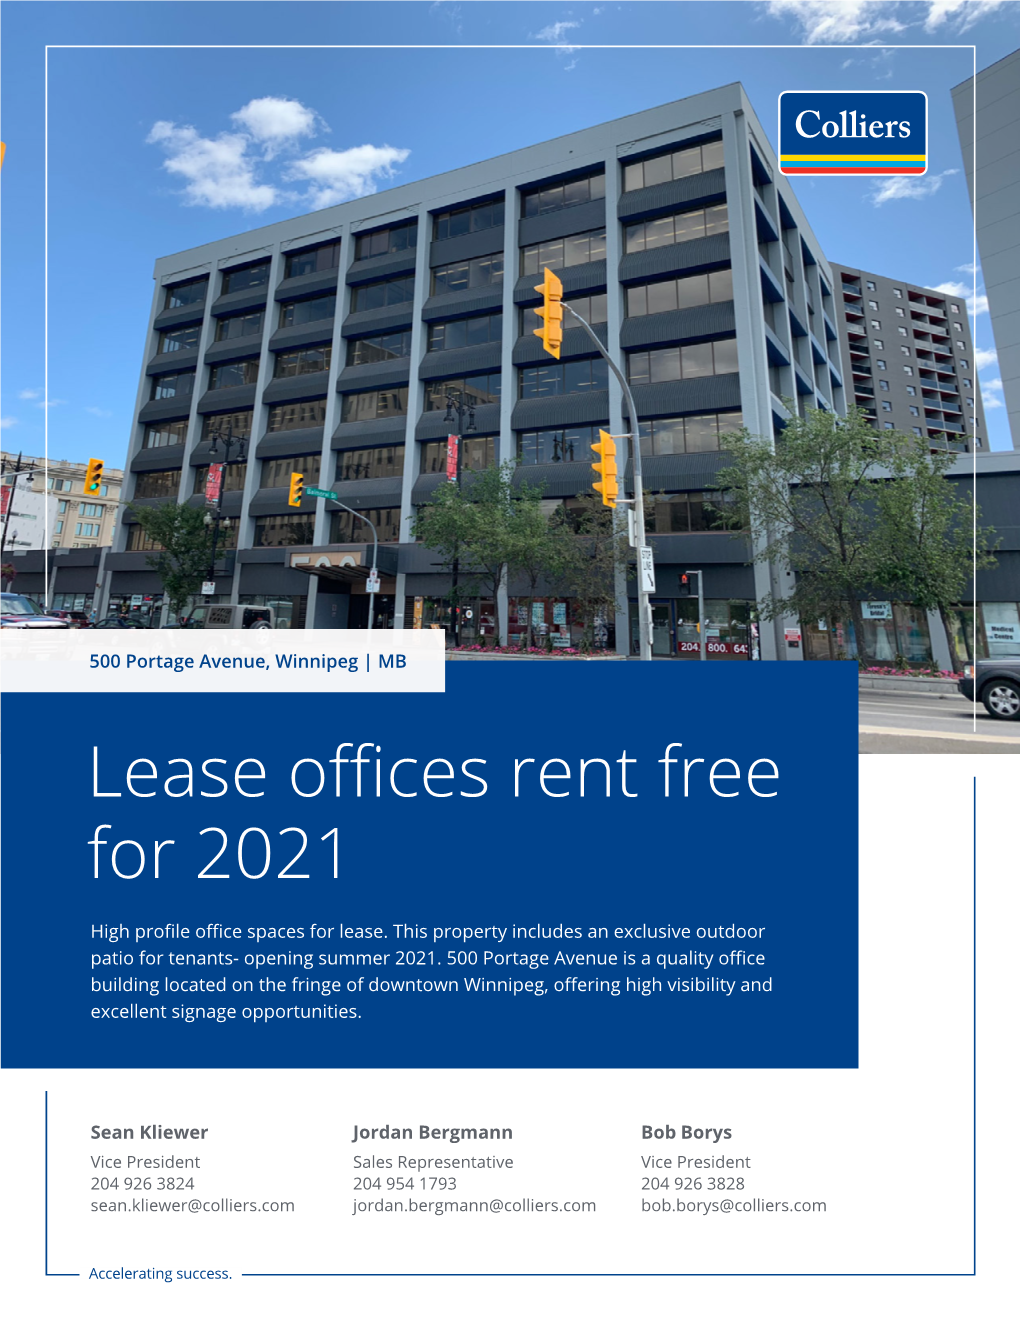 Lease Offices Rent Free for 2021